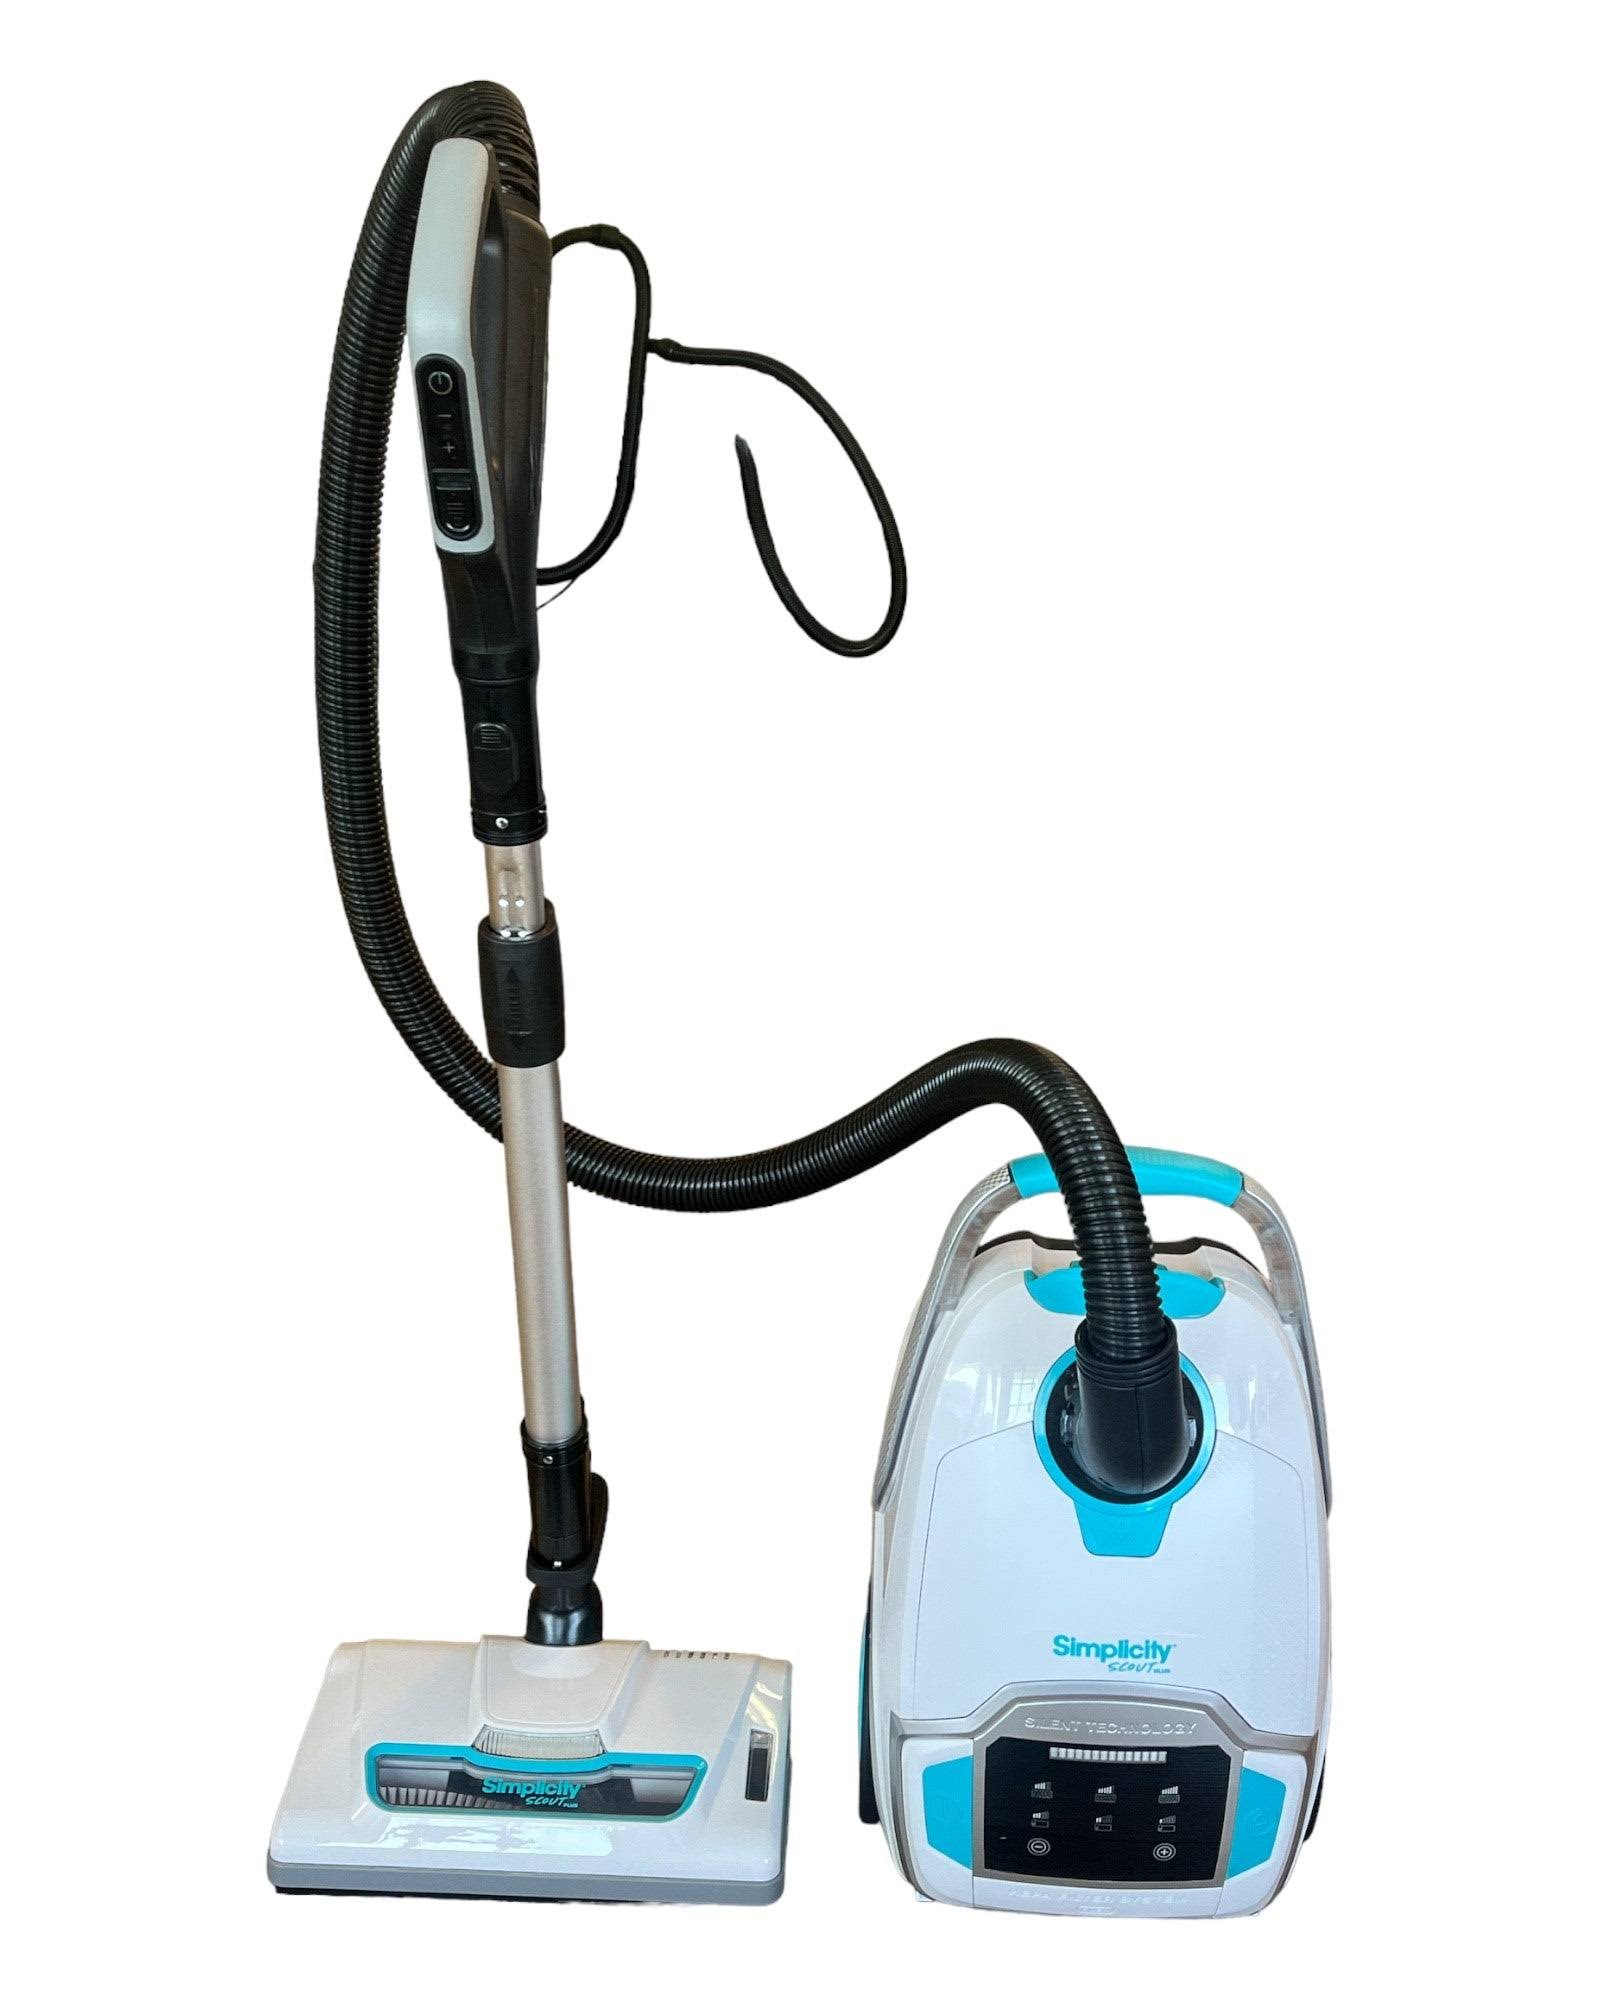 Simplicity Scout Plus Canister Vacuum